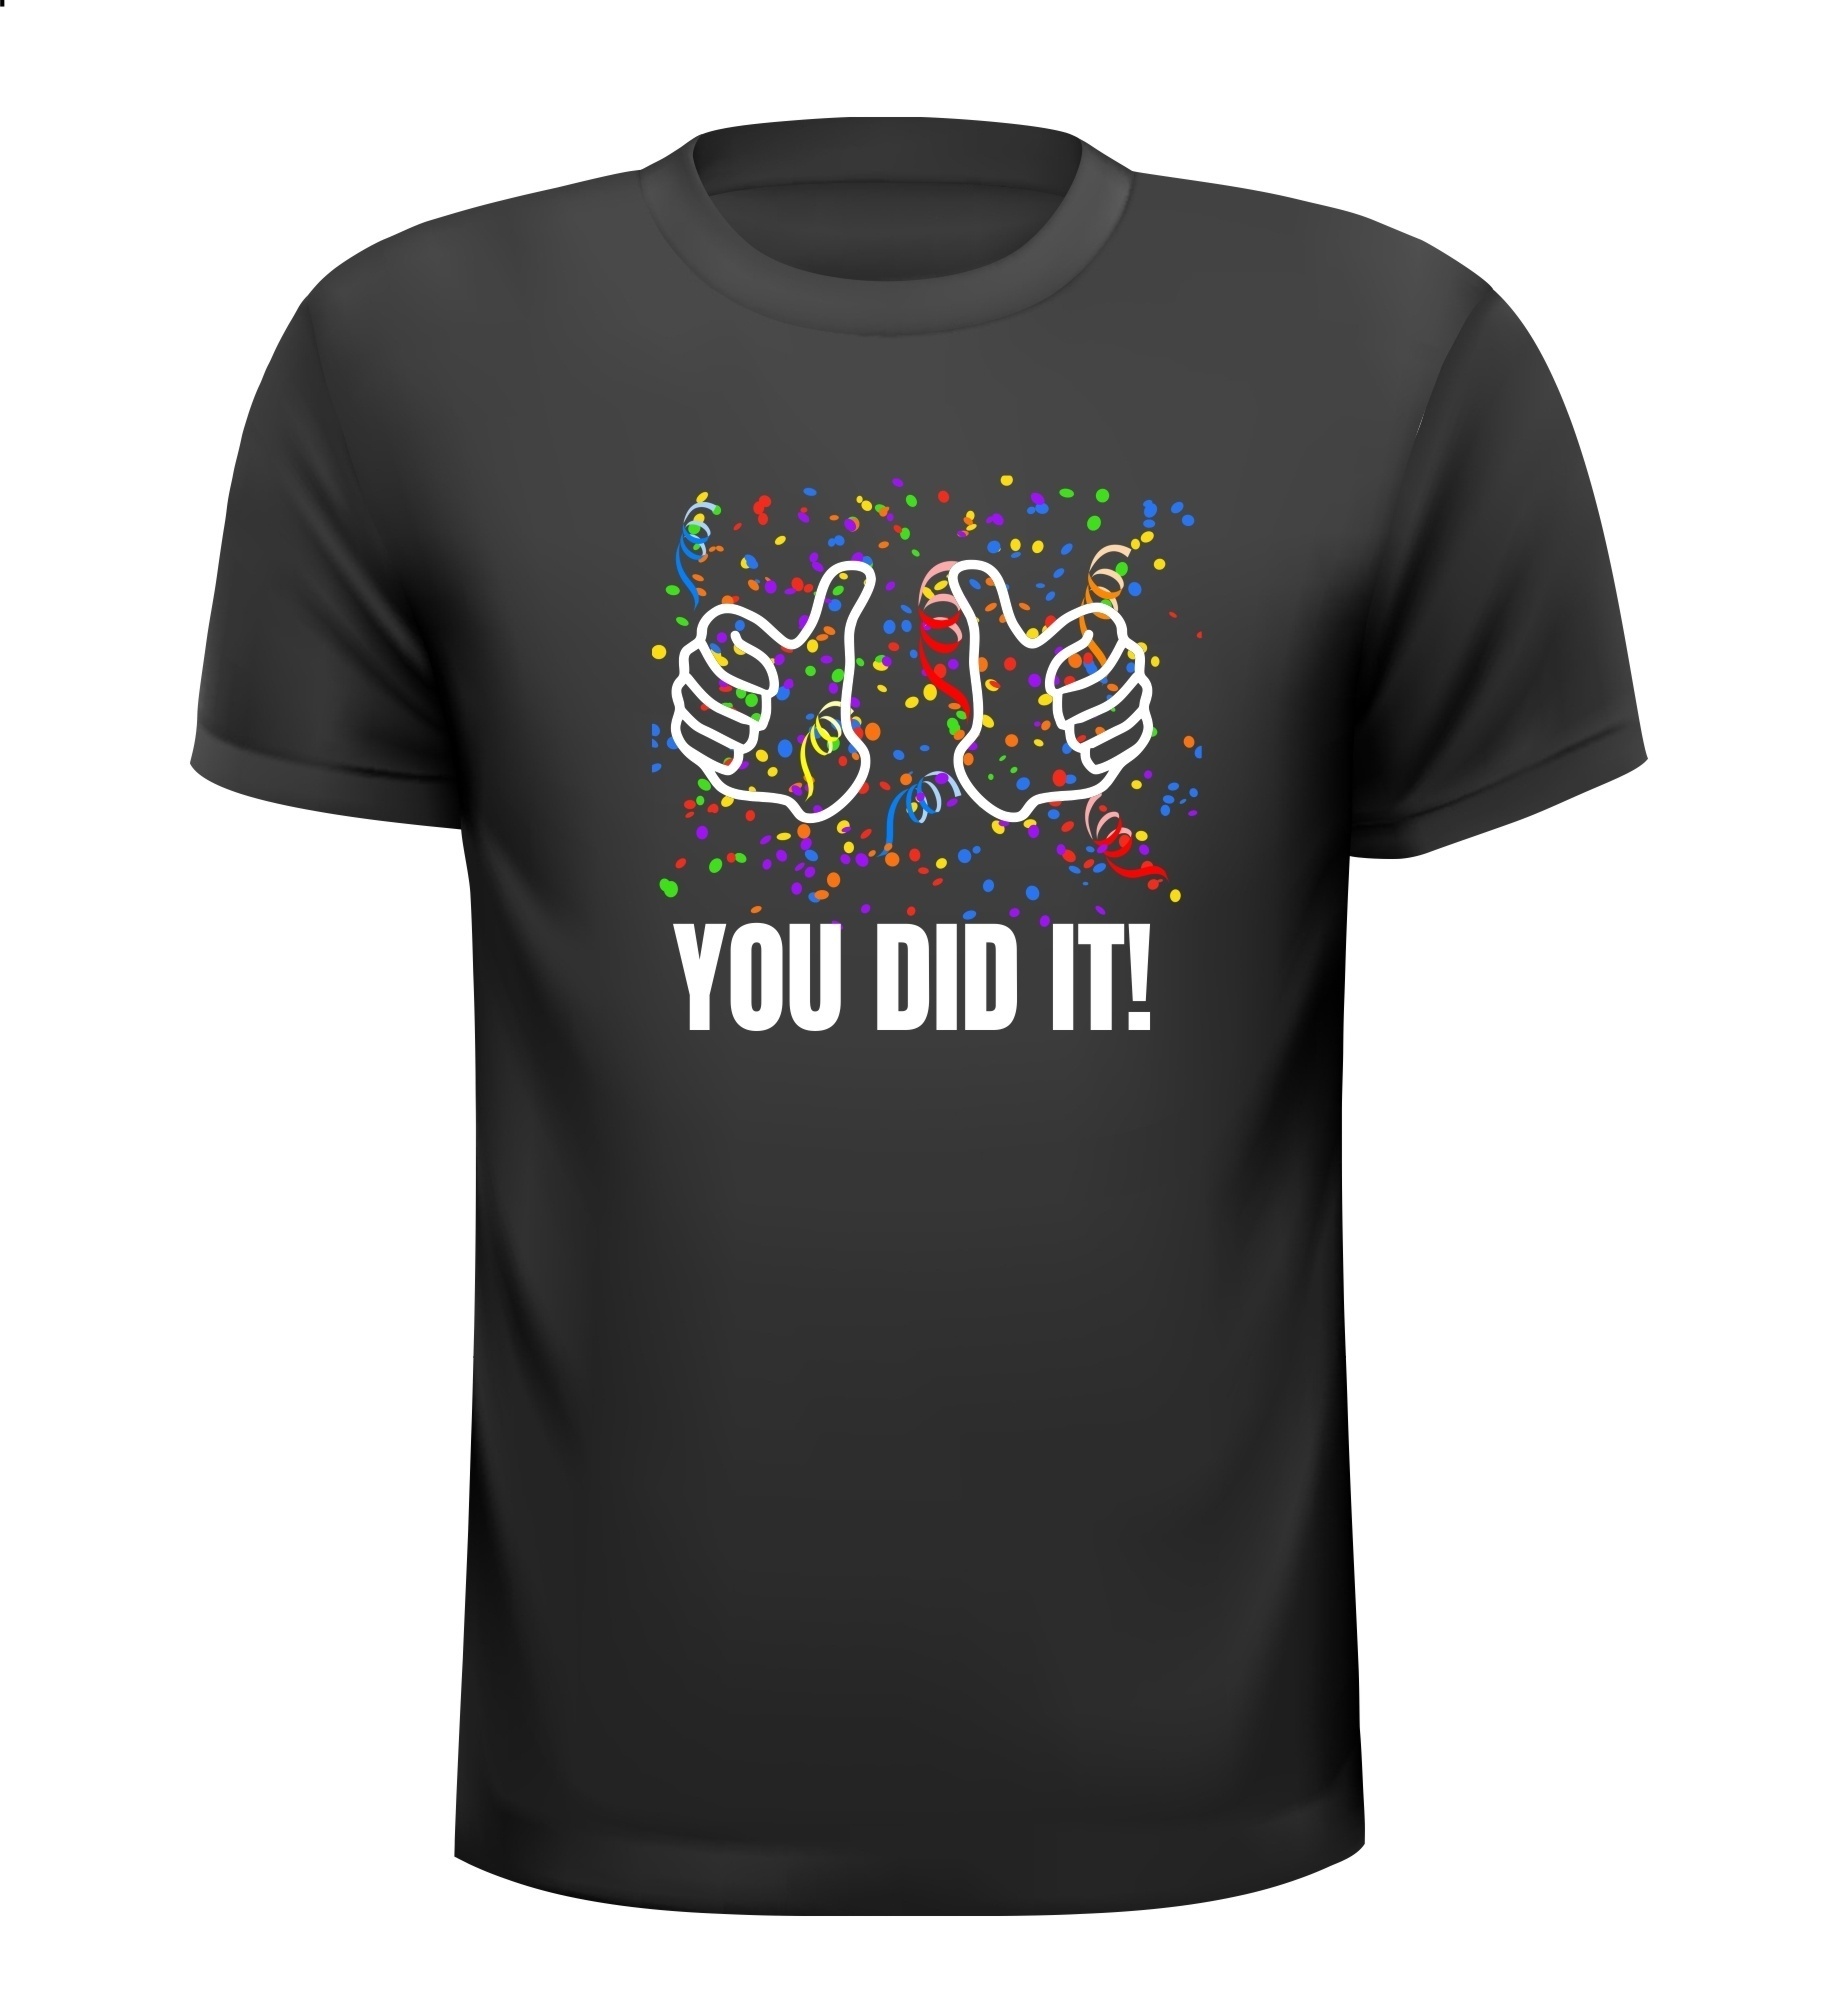 T-shirt you did it